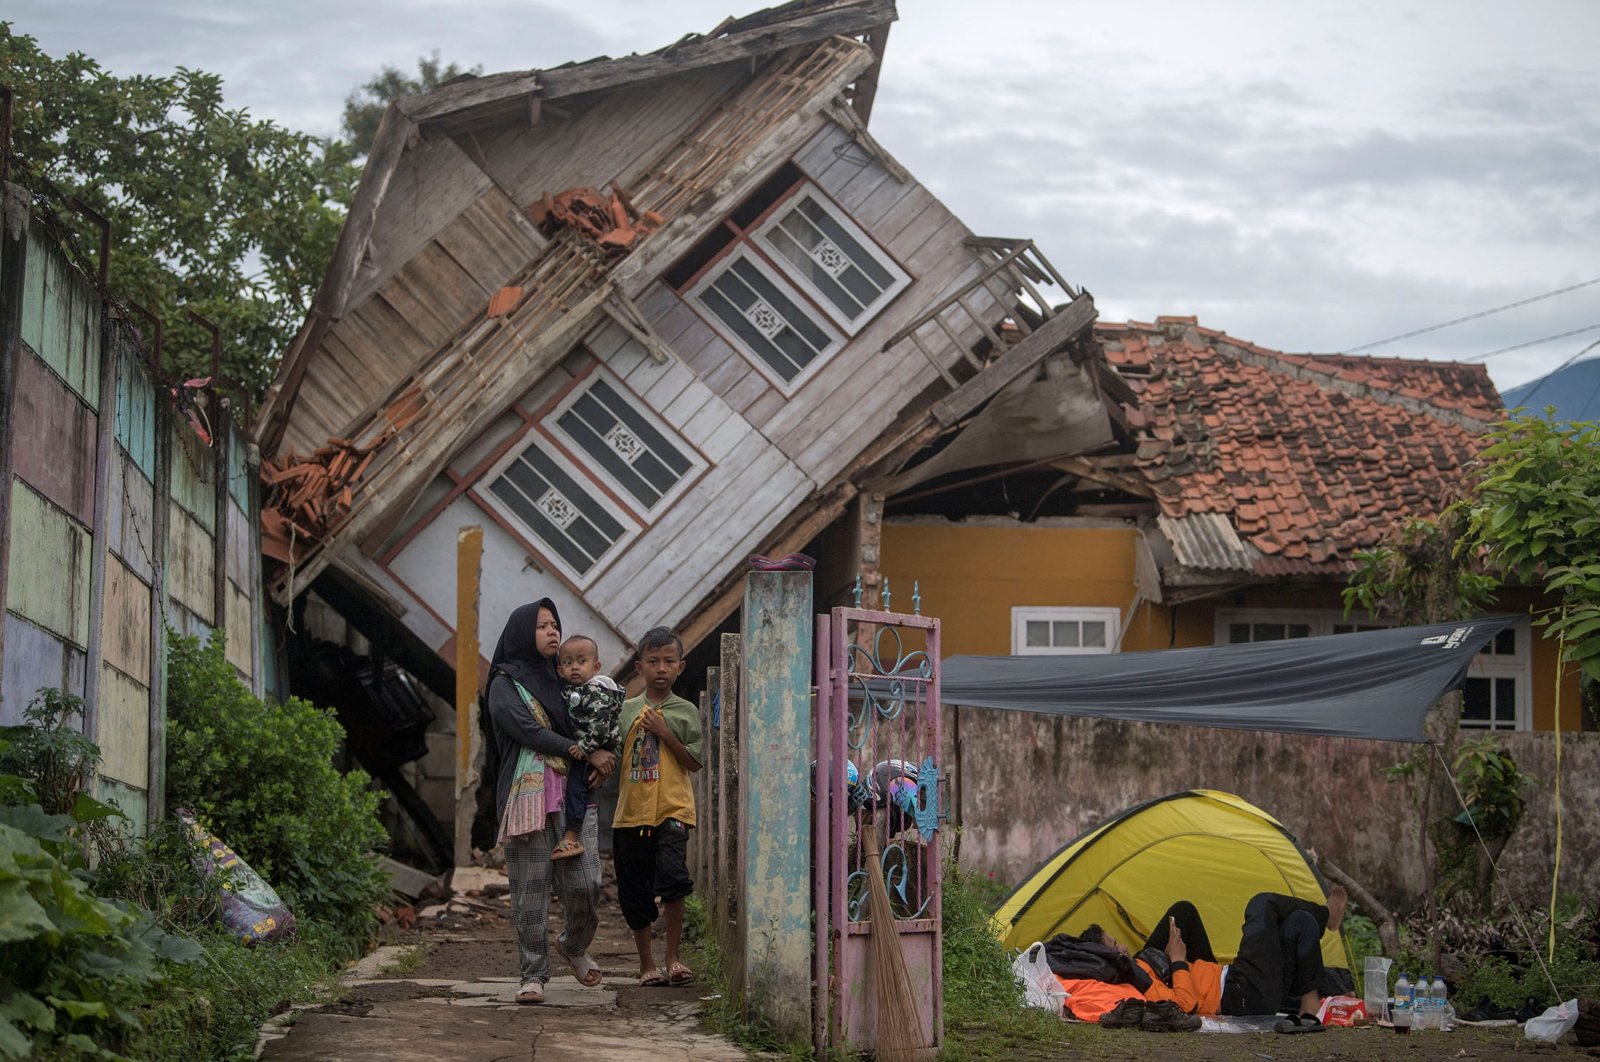 A woman carrying her child walks near a badly damaged house after earthquake in Cianjur, West Java province, Indonesia, Nov. 25, 2022. (Reuters Photo)